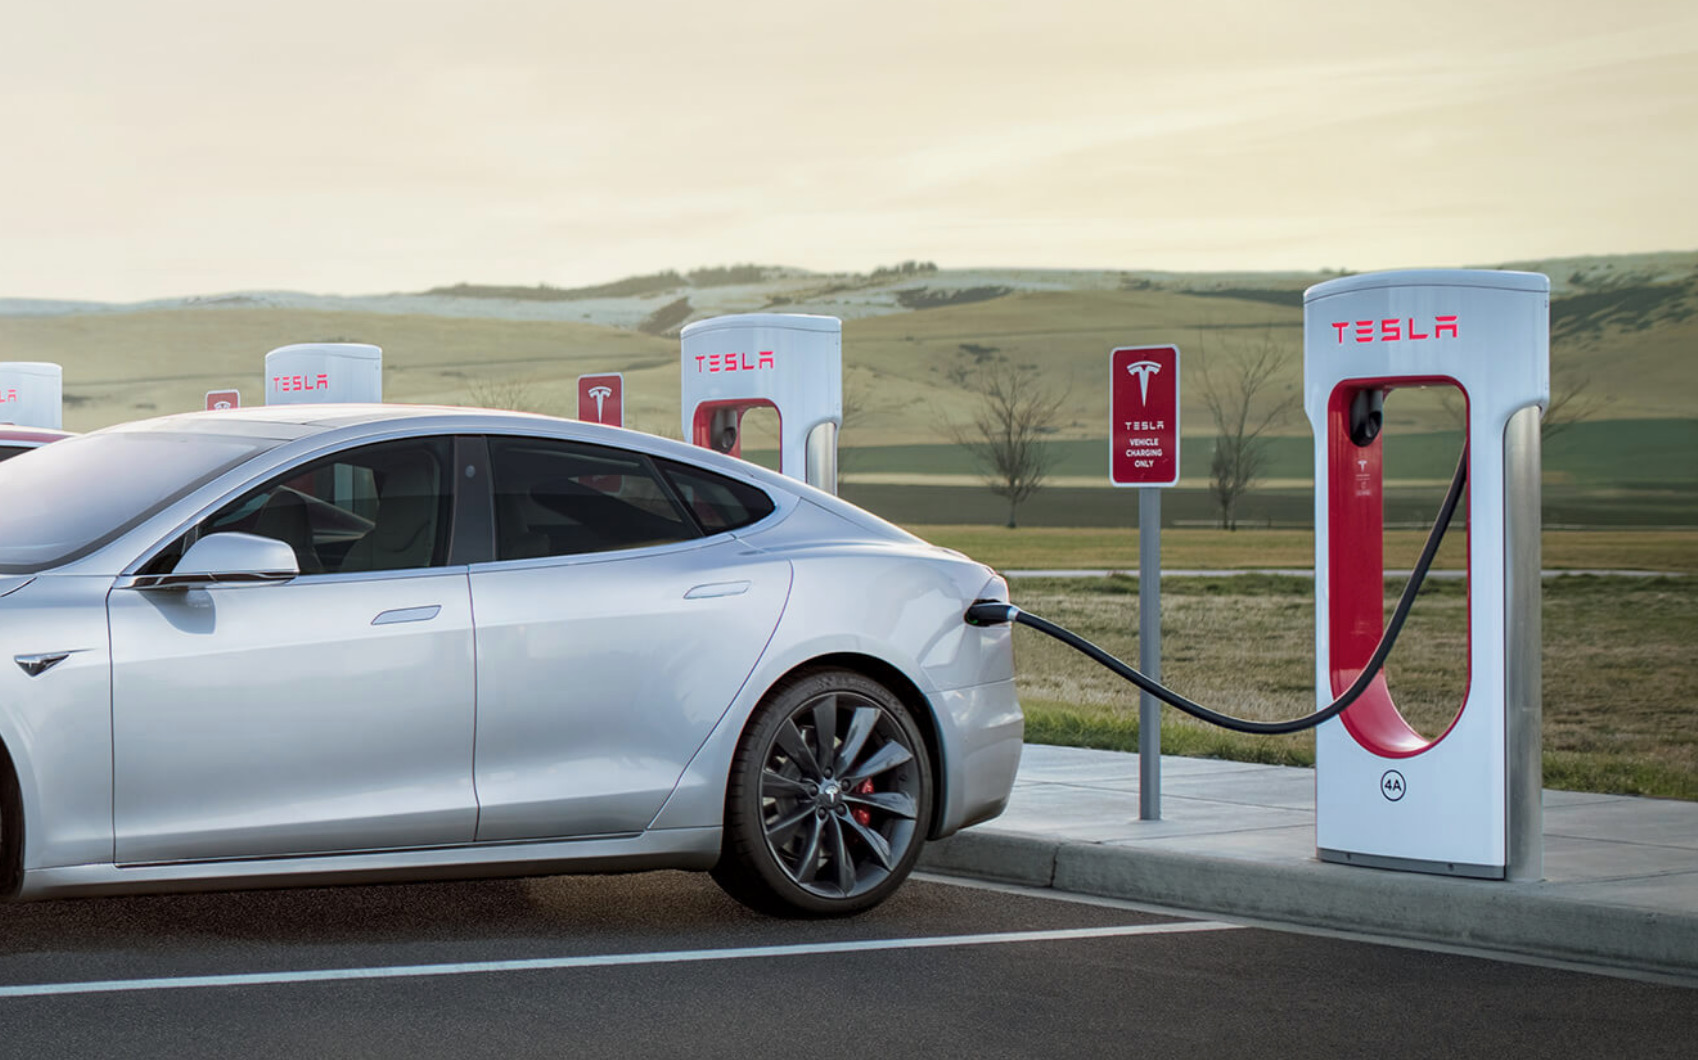 Tesla to open Supercharger network to other EVs, Musk says